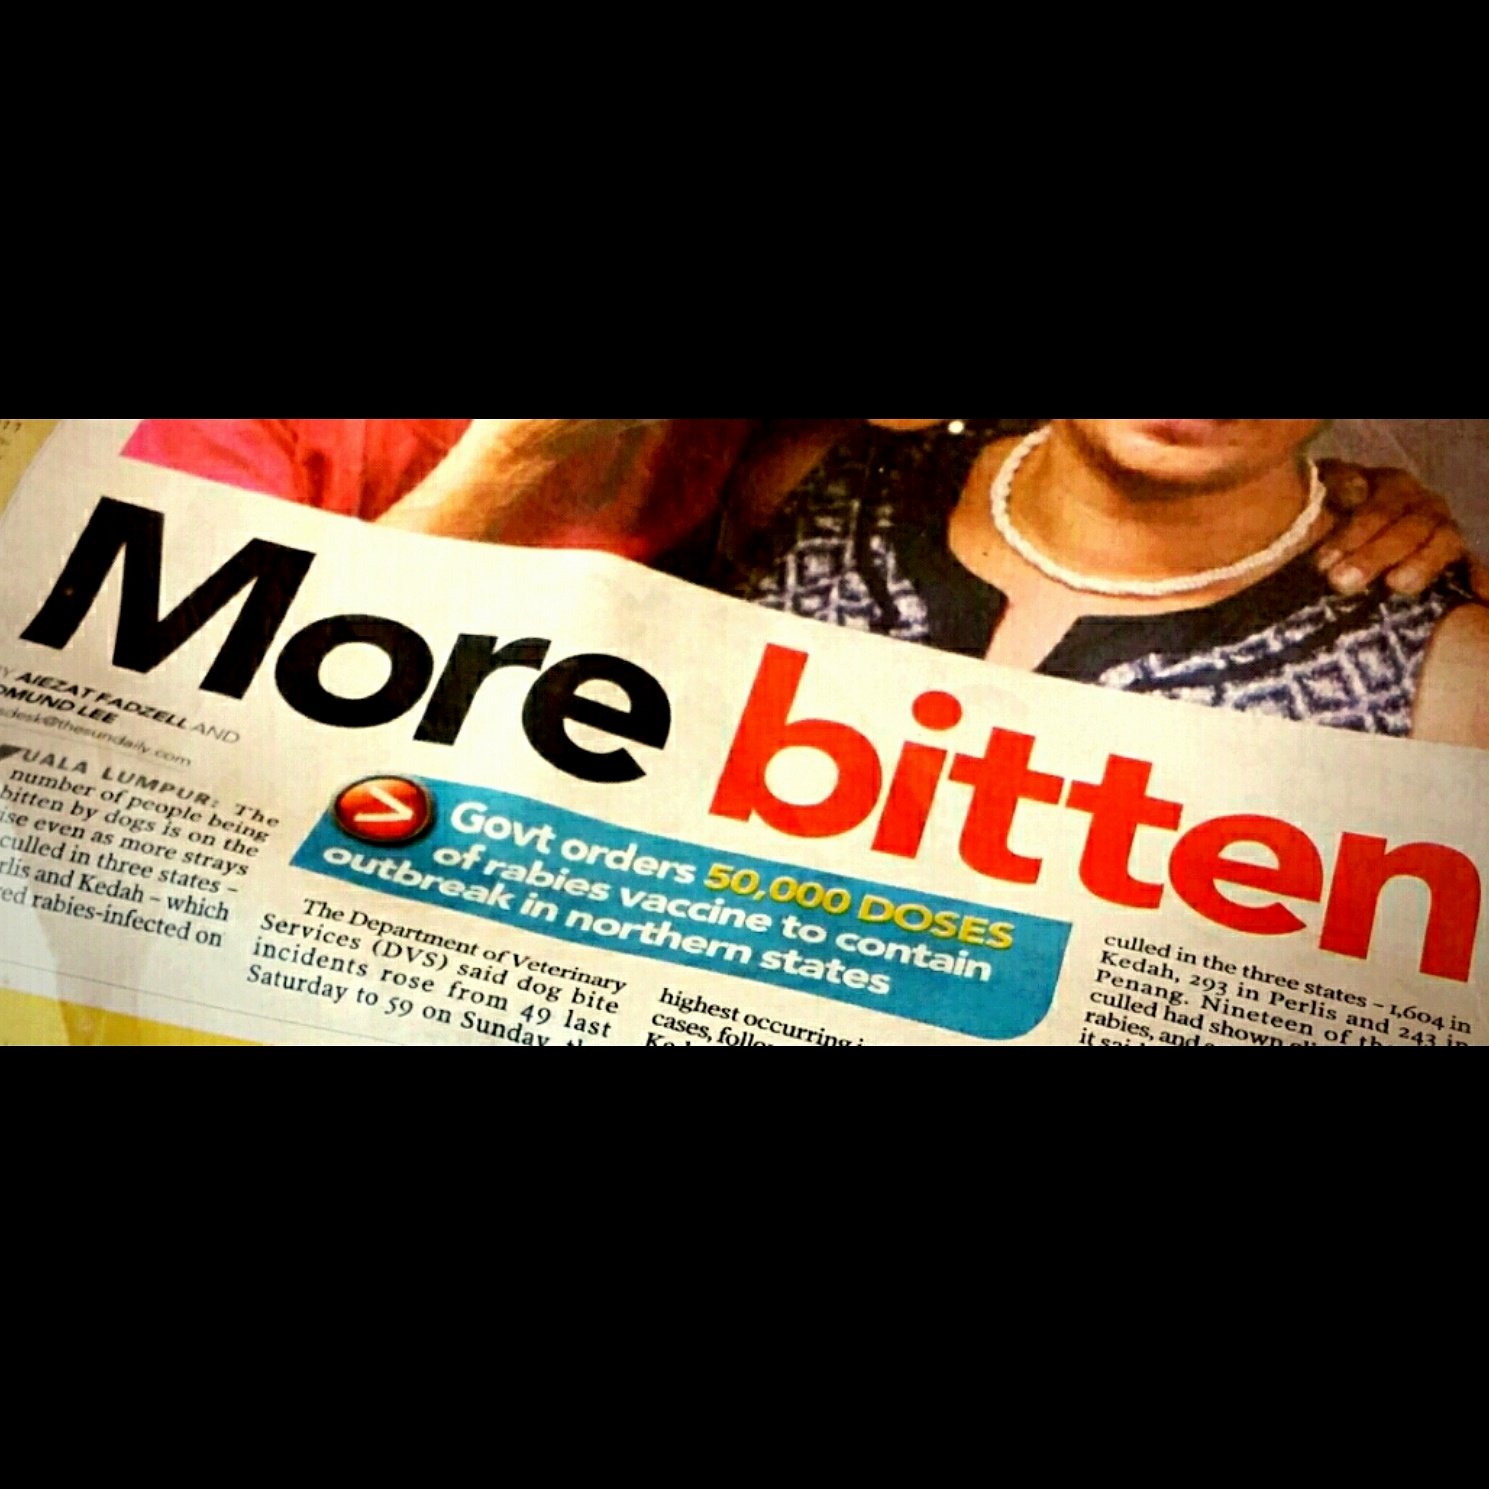 When the newspaper headline has the words #bitten #government and #outbreak in the same sentence, you know you're in for a ride....*shudder* <insert theme for #amc #thewalkingdead tv series> #robertkirkman #imagecomics #walkers #biters #zword #zombie